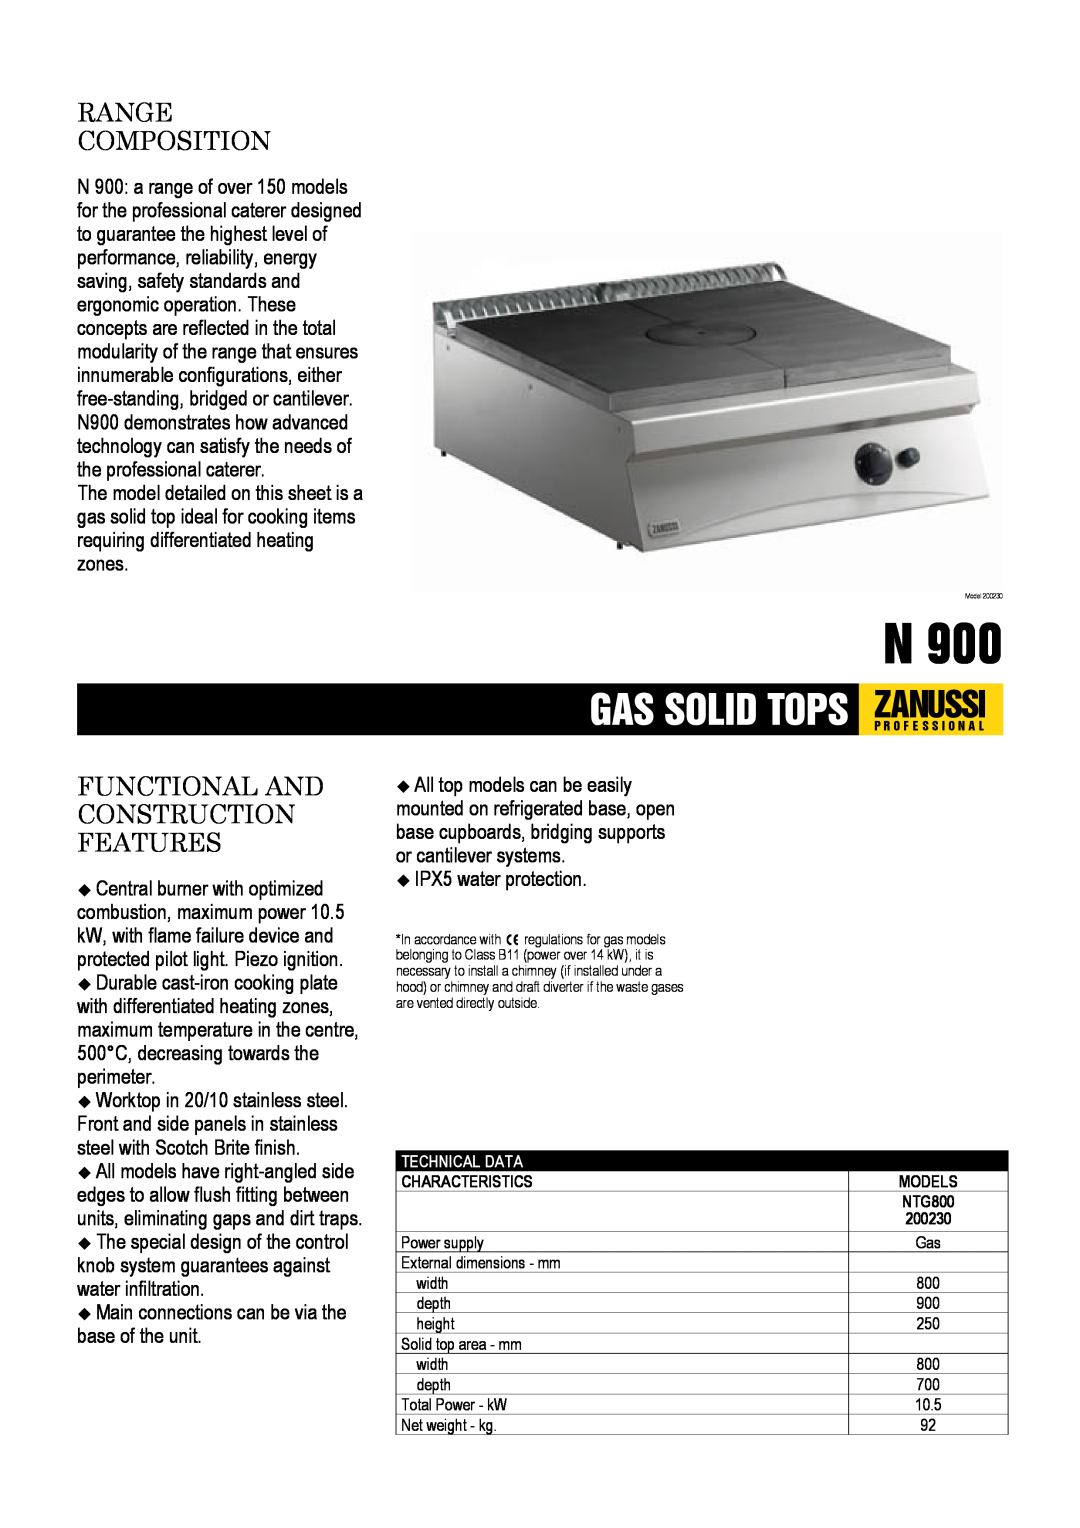 Zanussi 200230, NTG800 dimensions Gas Solid Tops, Zanussi, Range Composition, Functional And Construction Features 